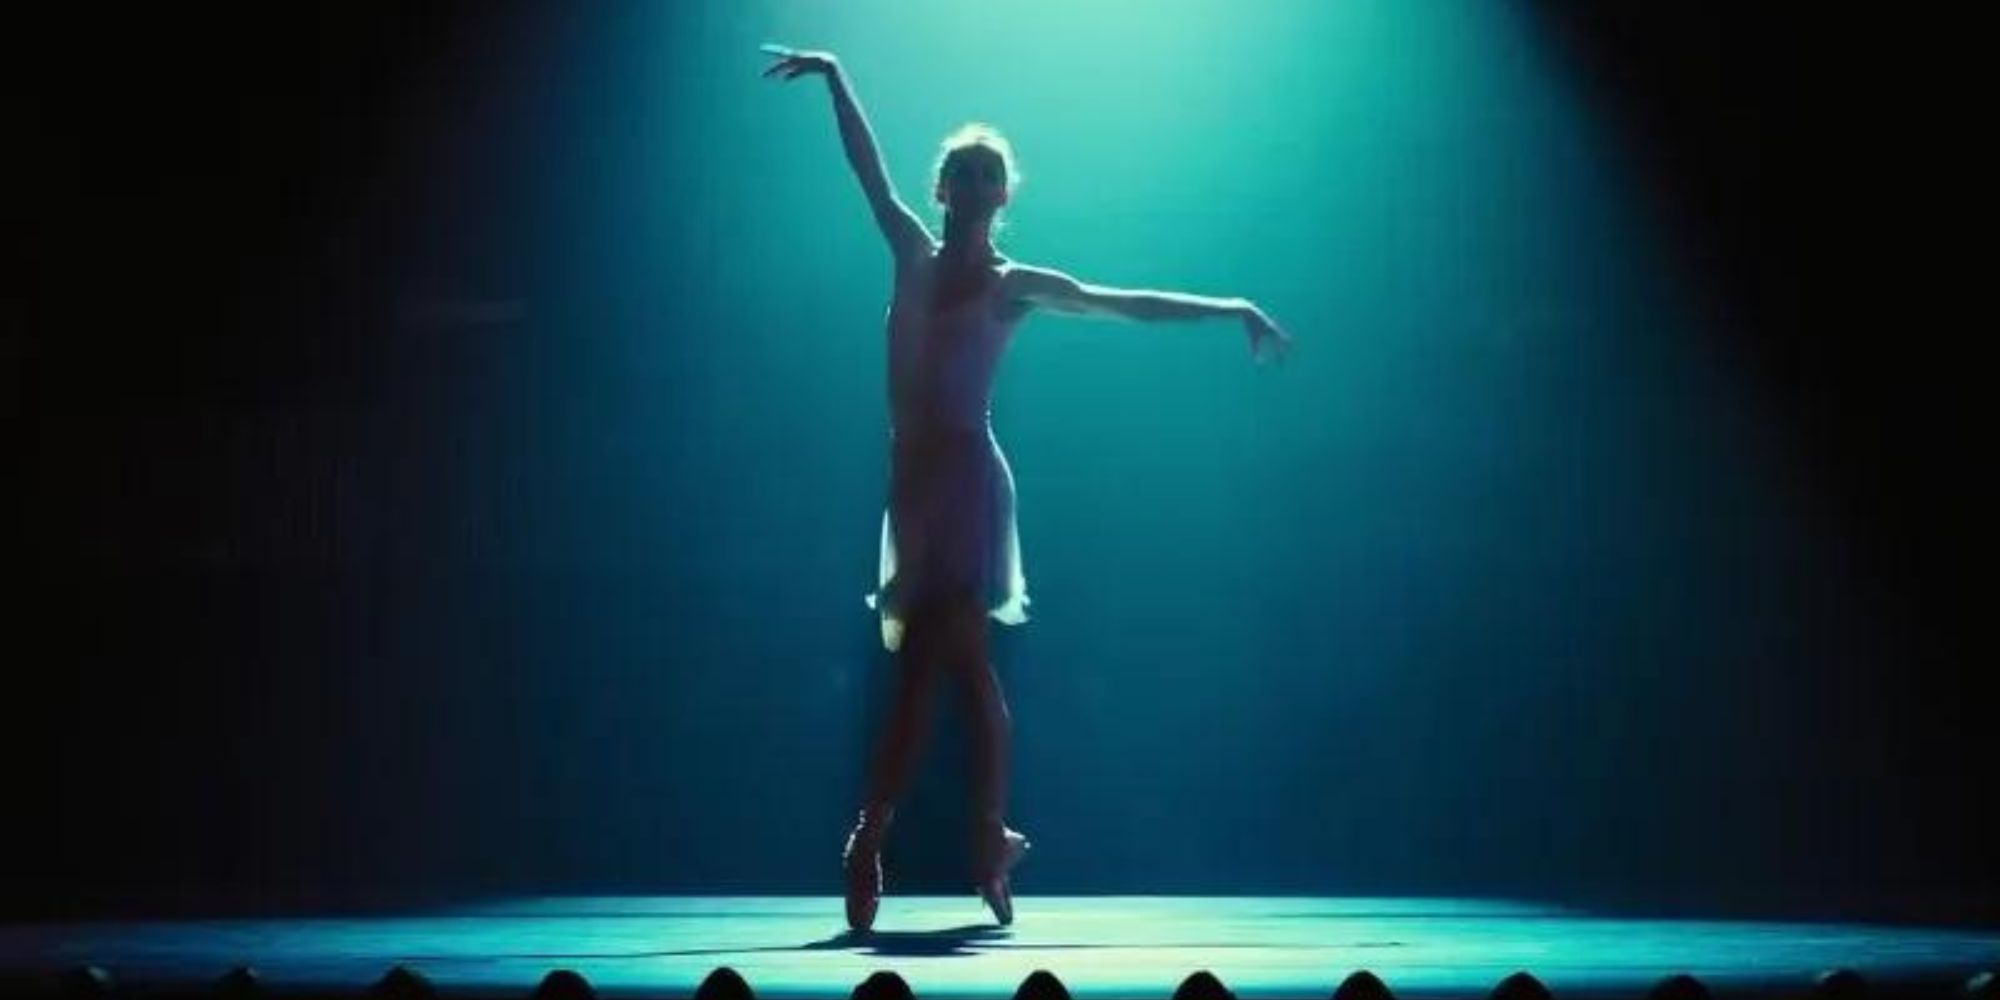 Unity Phelan as The Ballerina displays the pointe technique in John Wick: Chapter 3 - Parabellum.